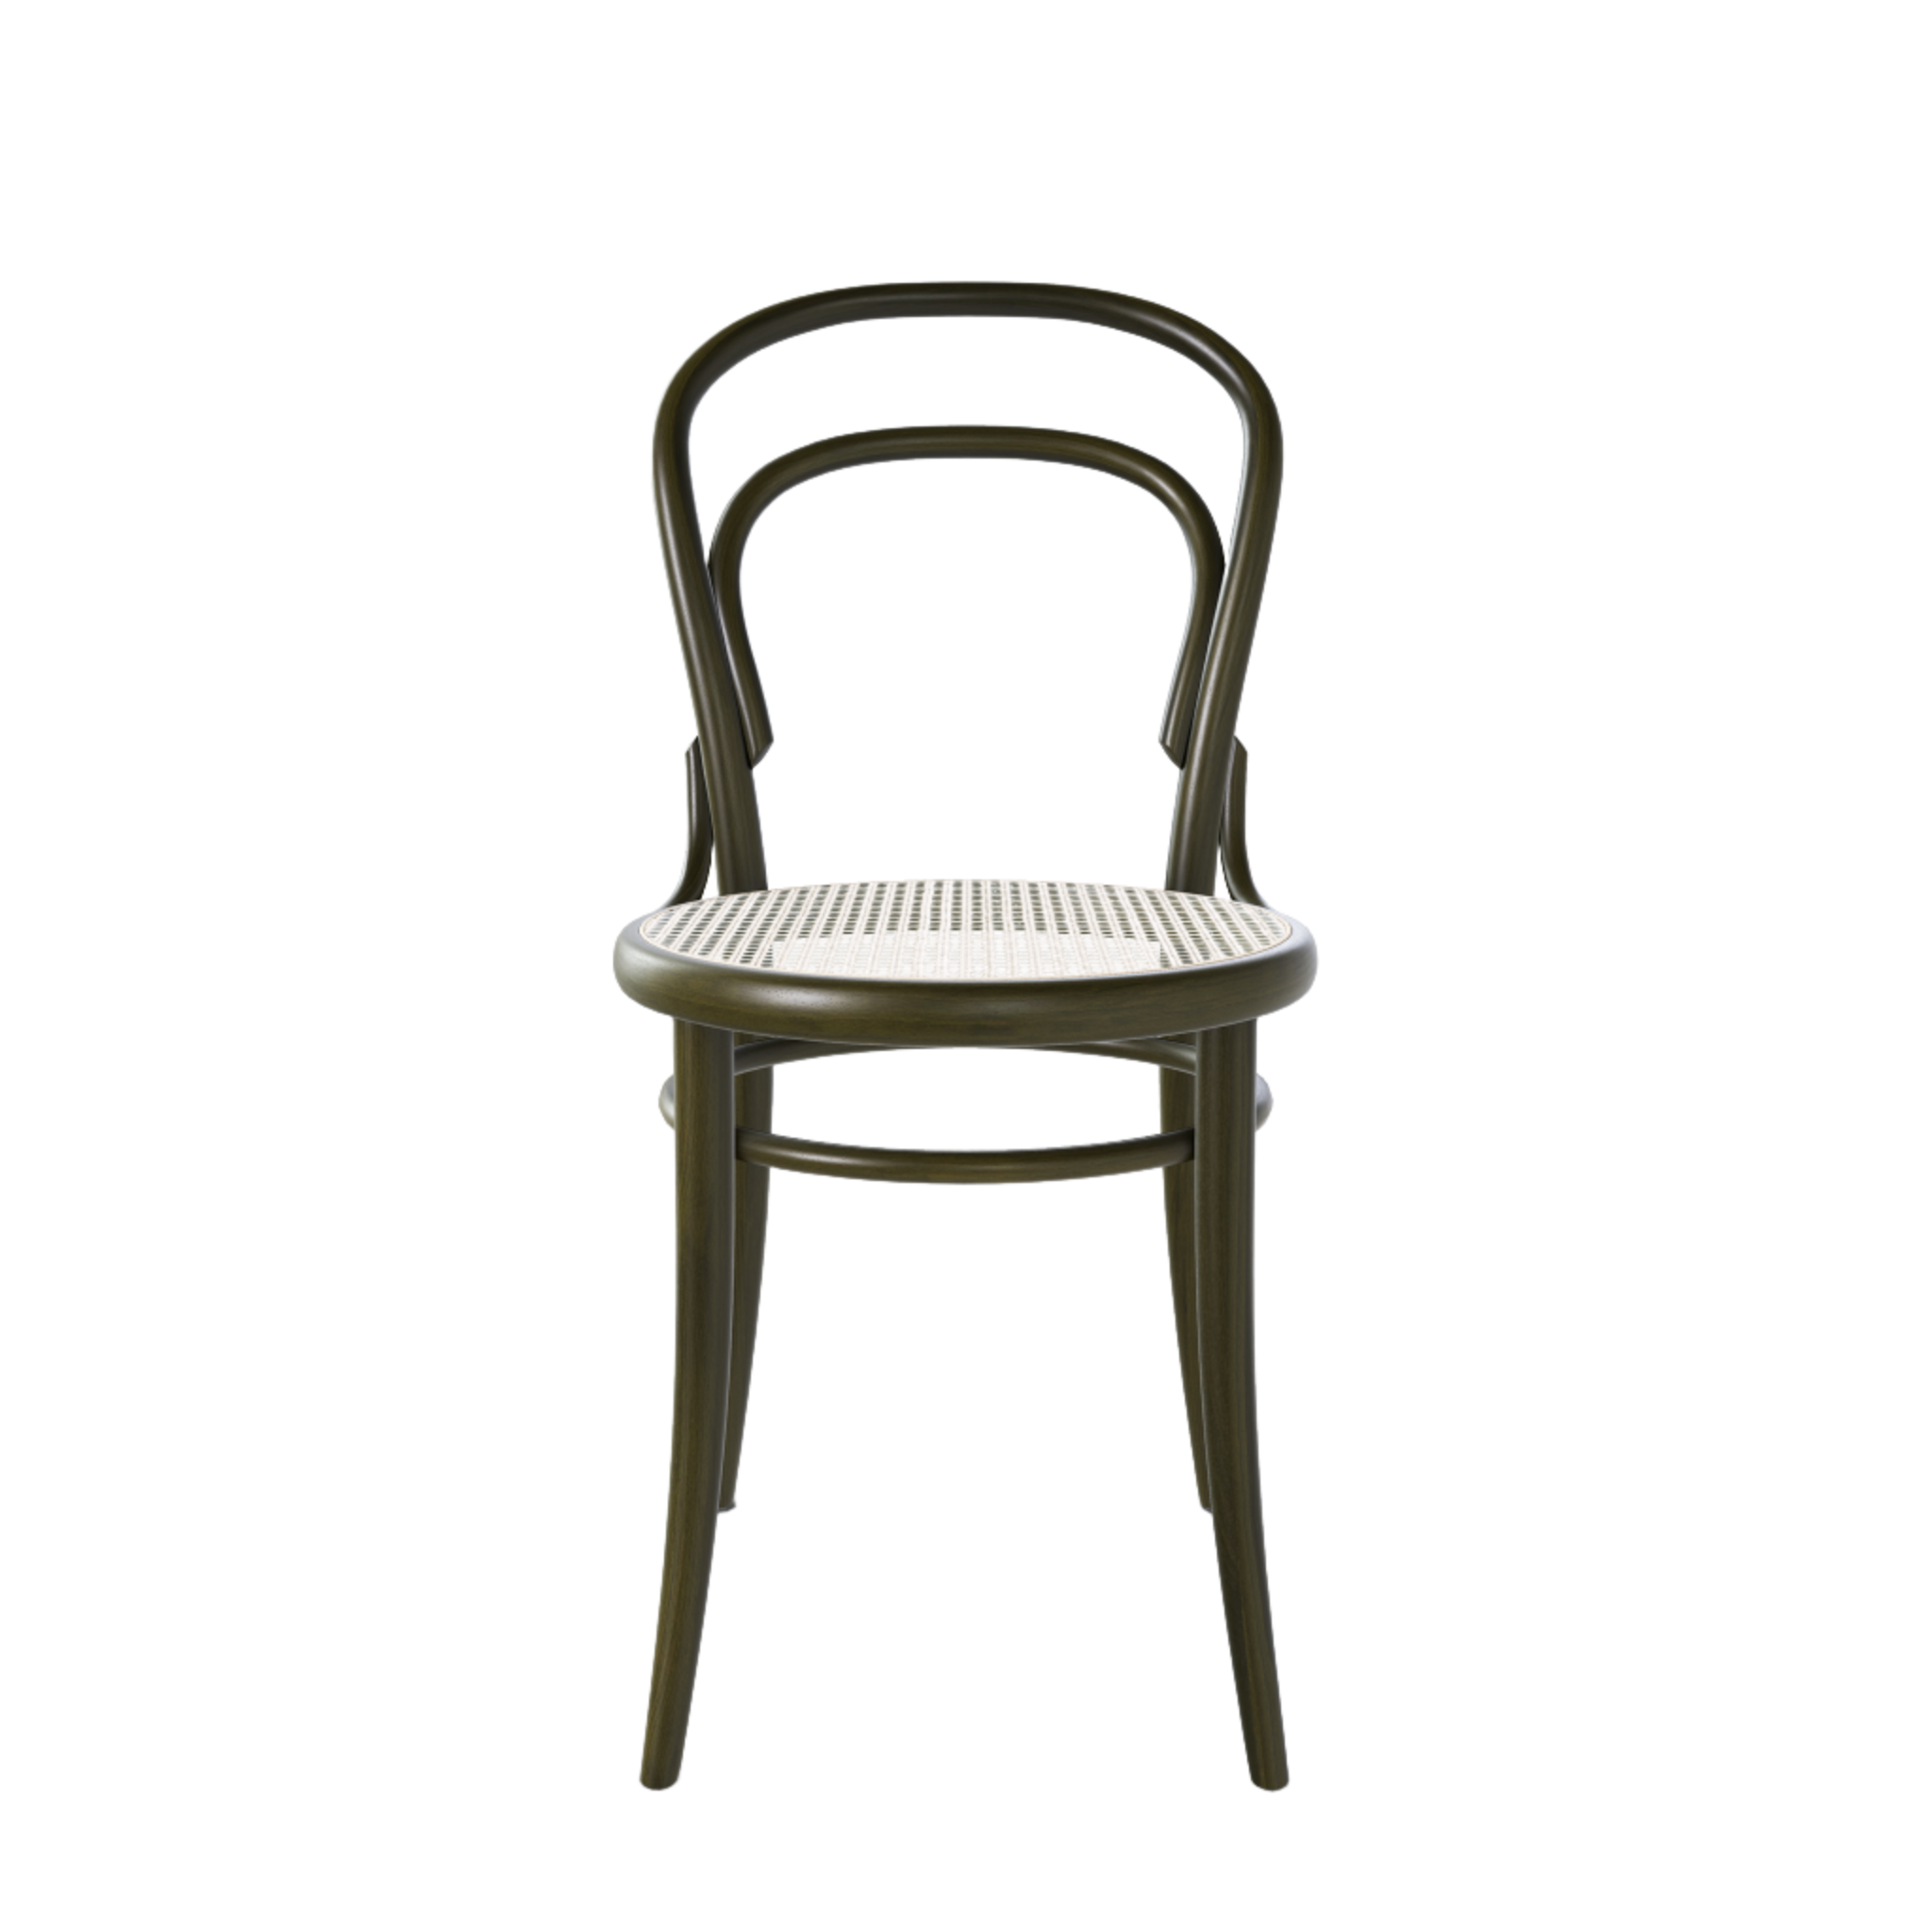 Ton 14 Dining Chair with cane seat in forest green